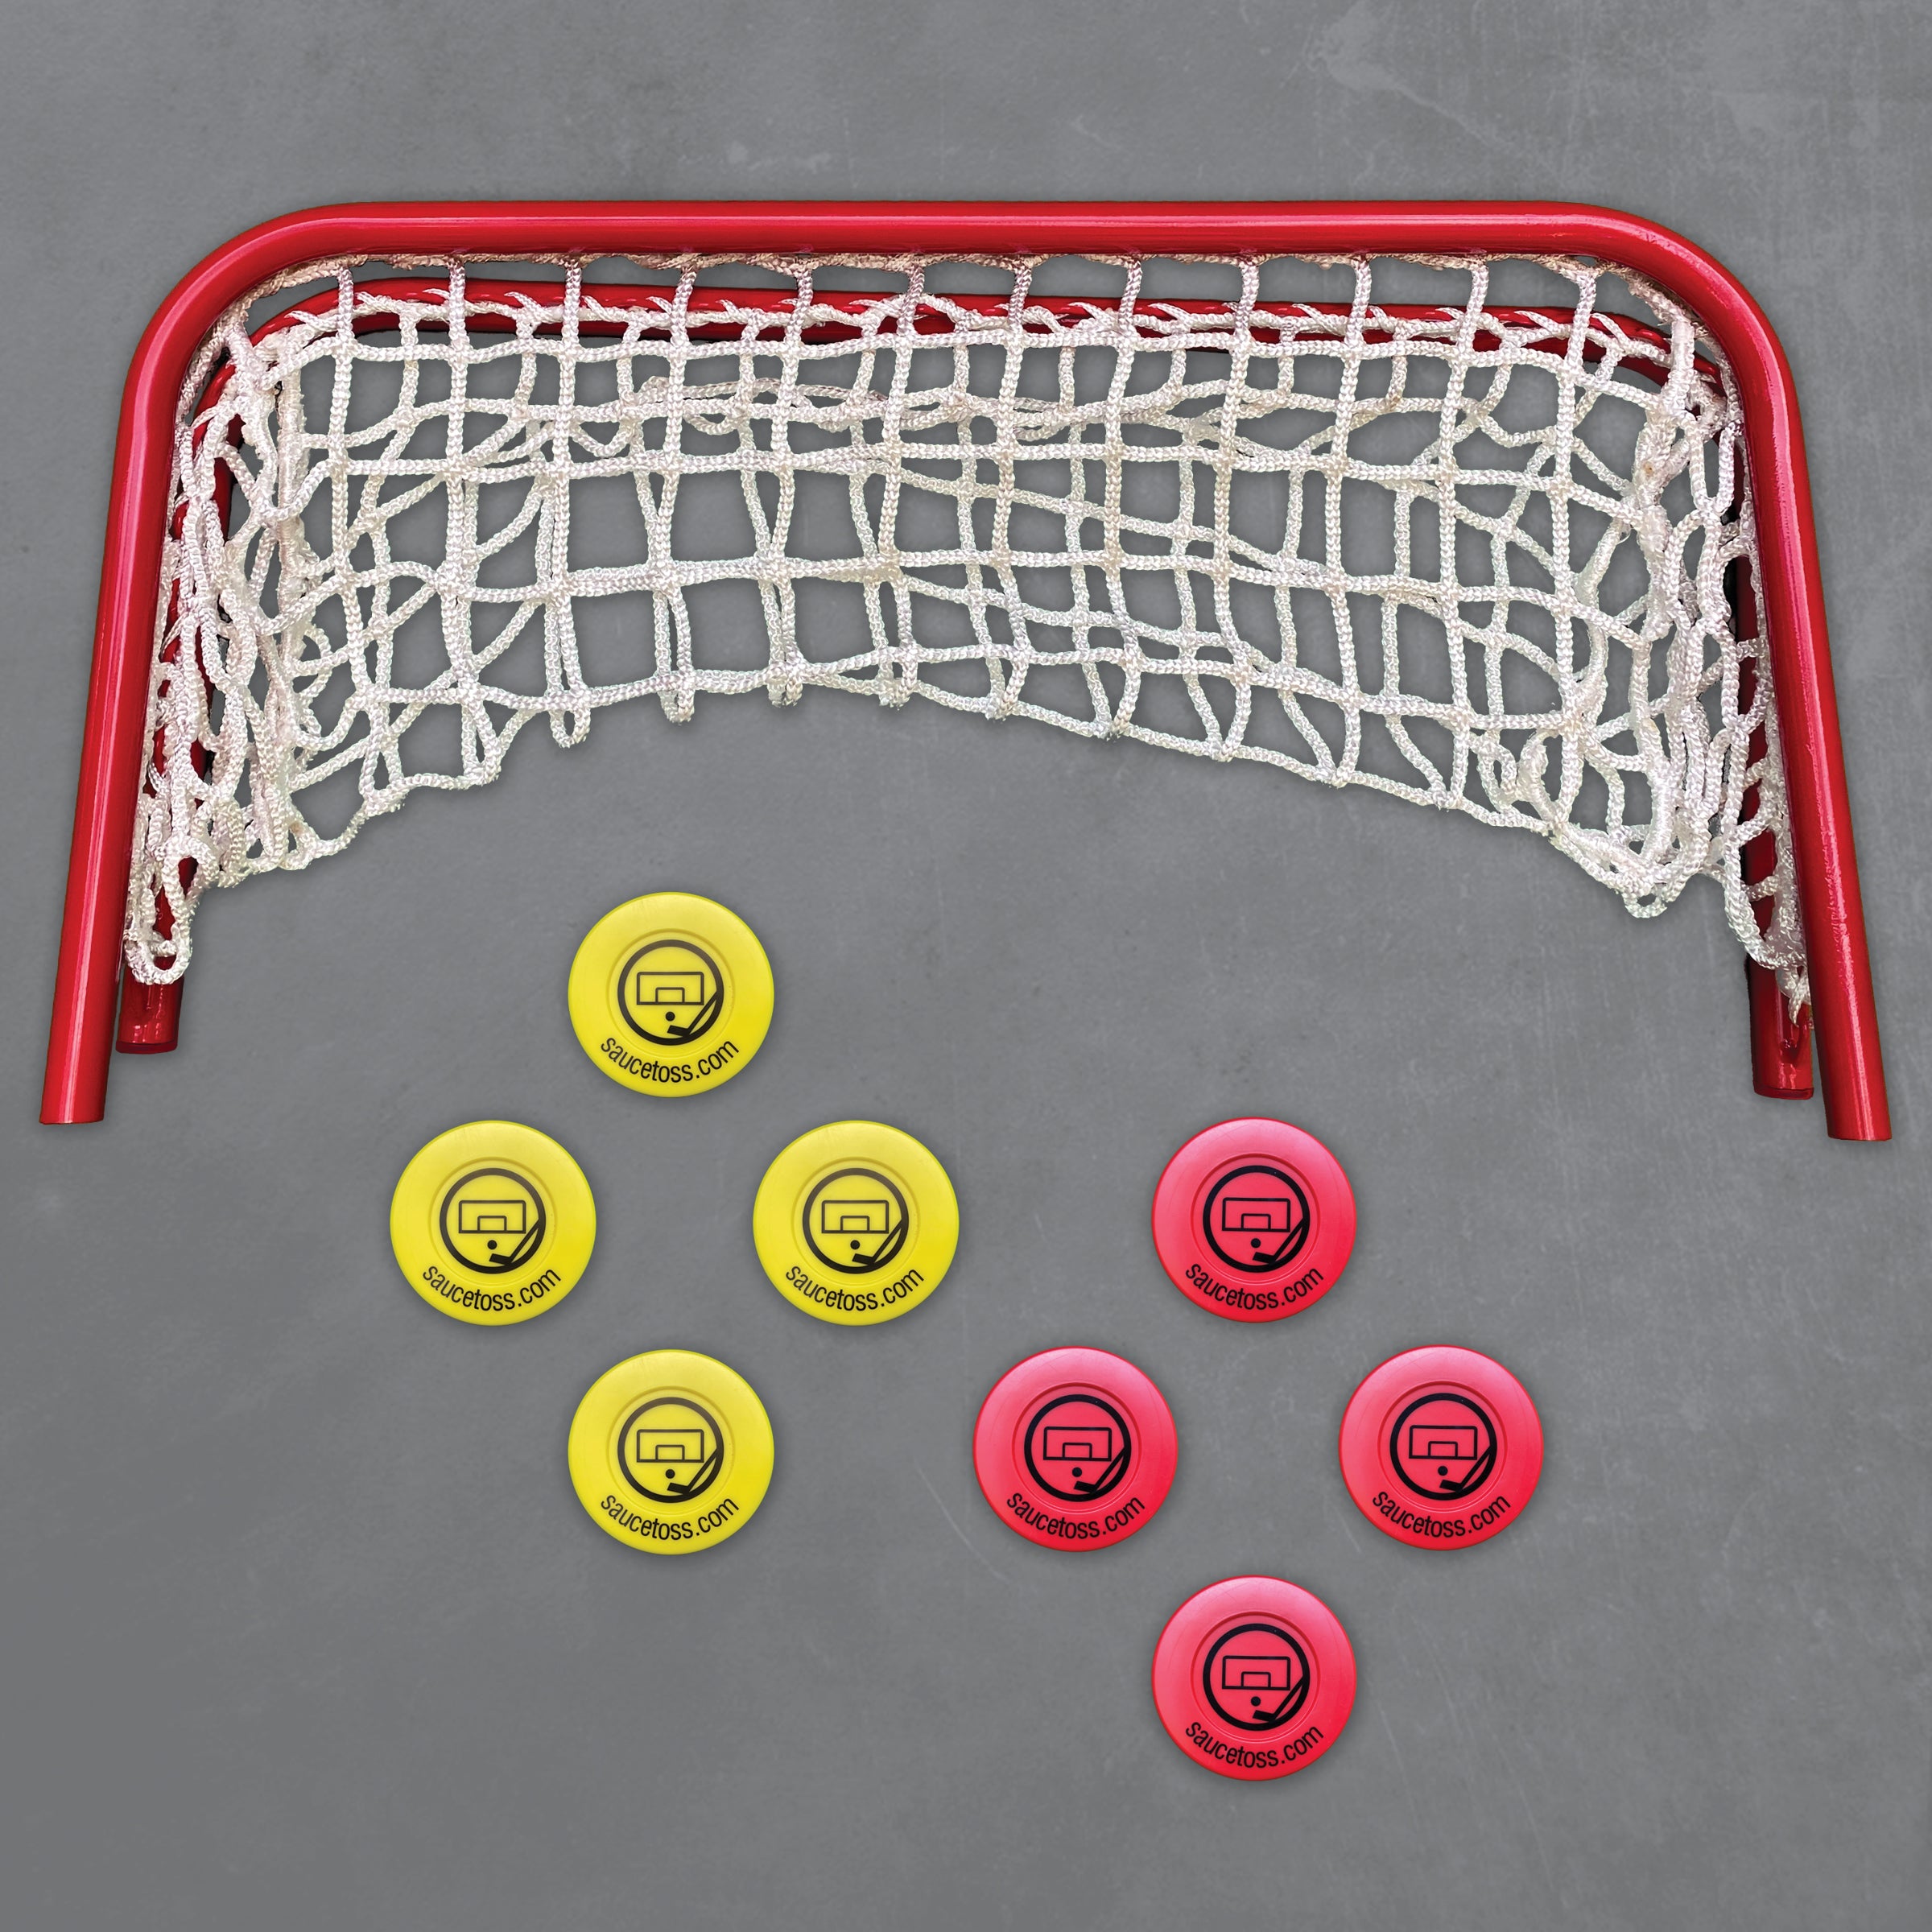 Pucks and net on grey background